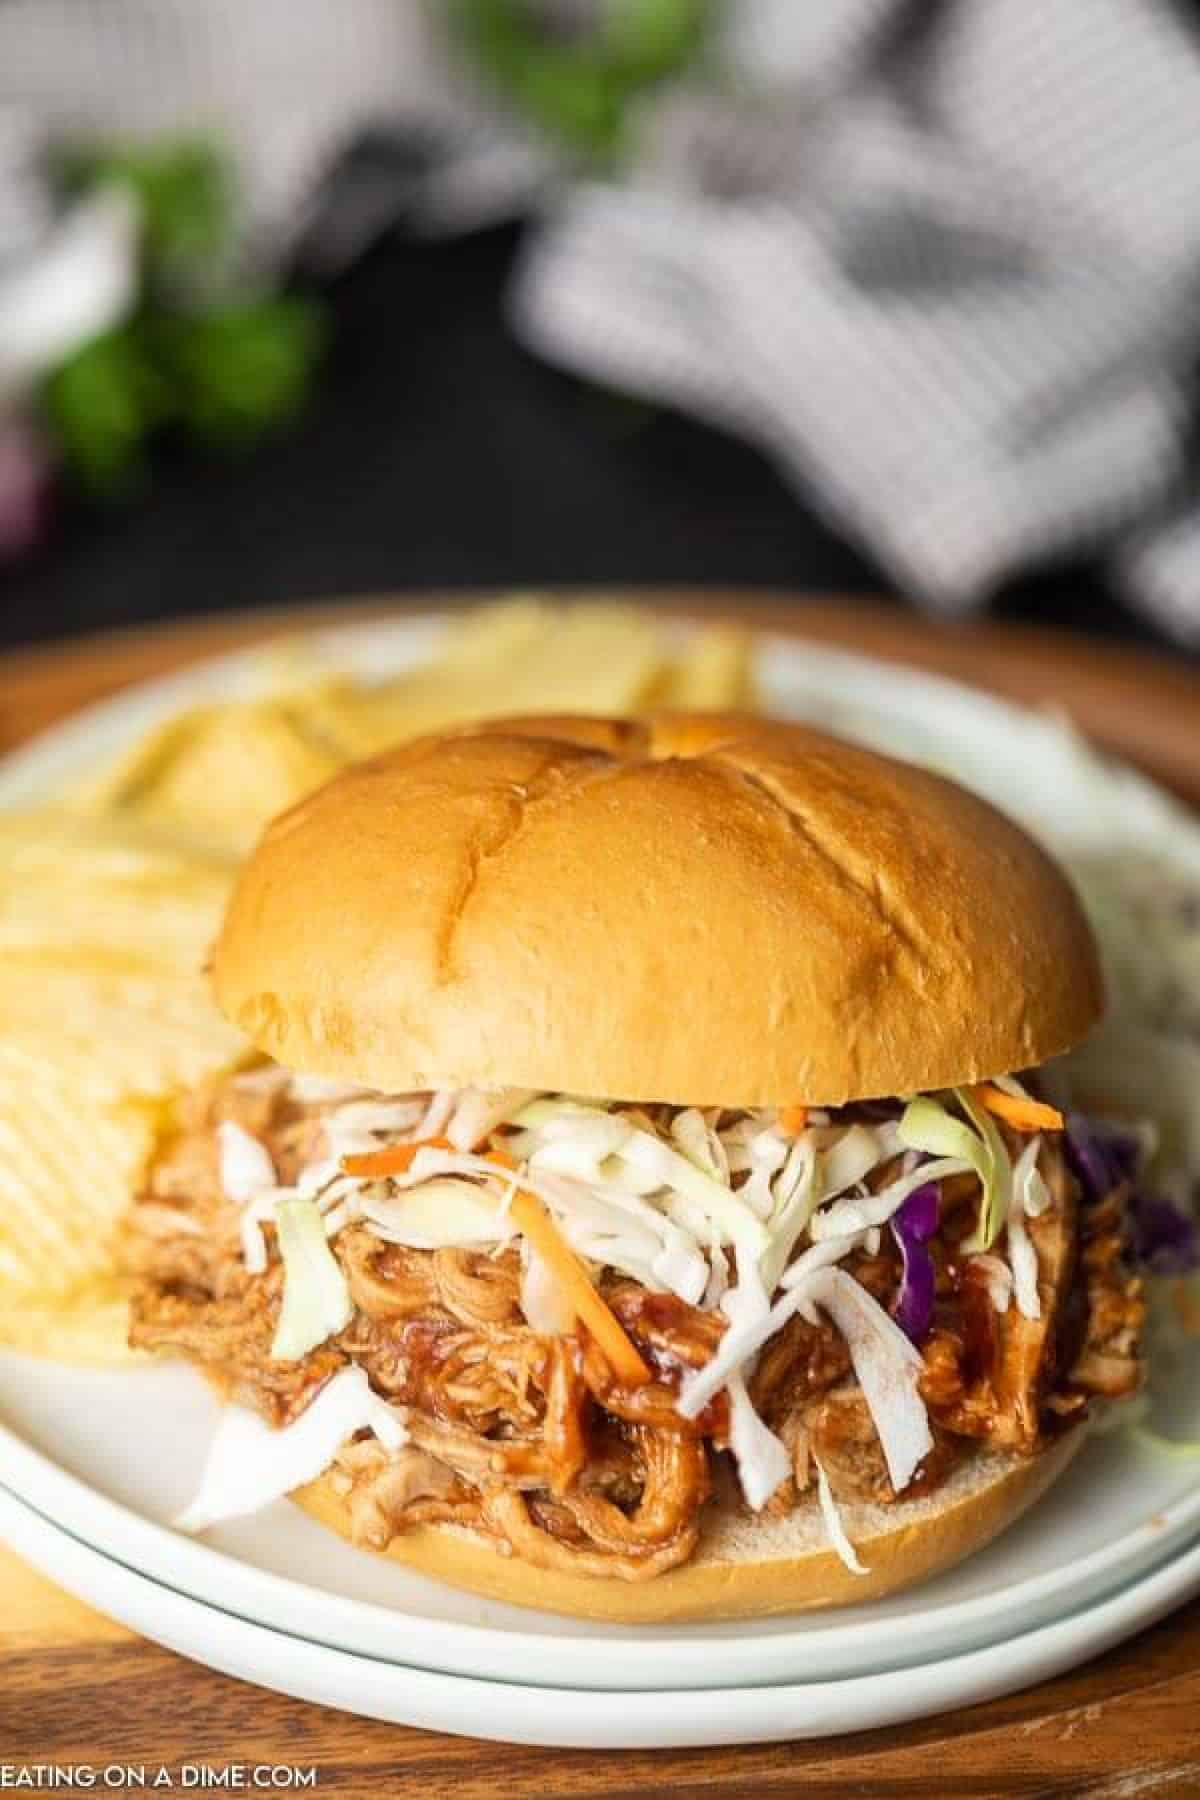 Pulled pork sandwich on a plate with chips